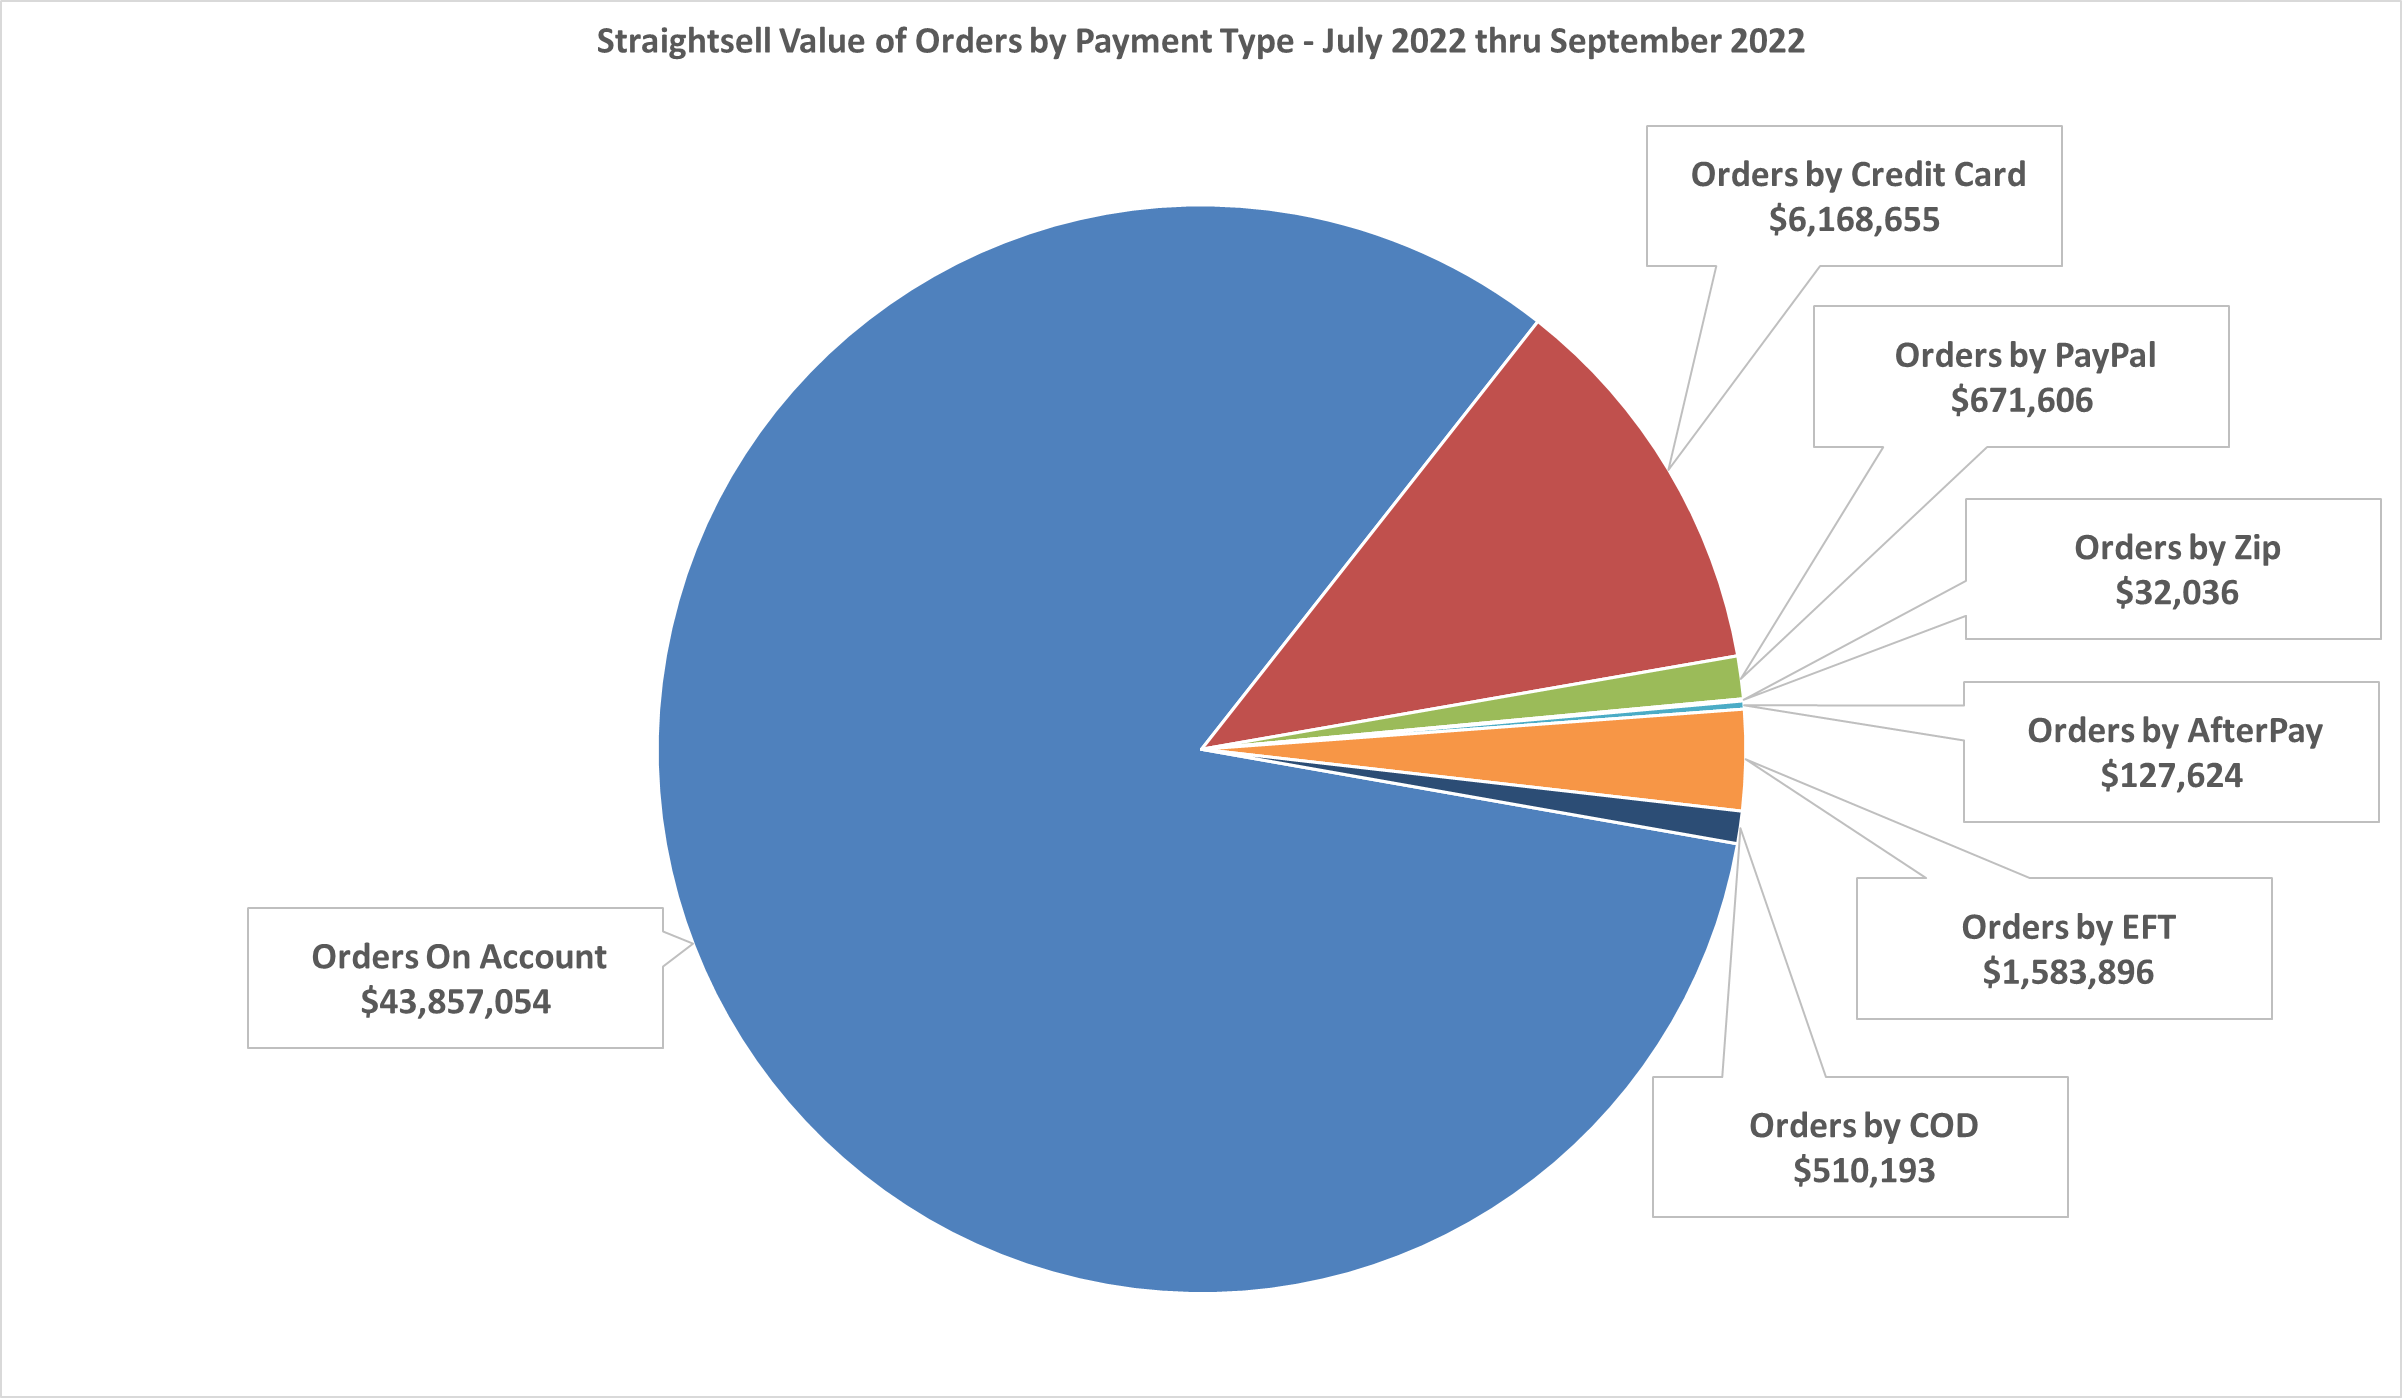 Straightsell Value of Orders by Payment Type - July 2022 thru September 2022